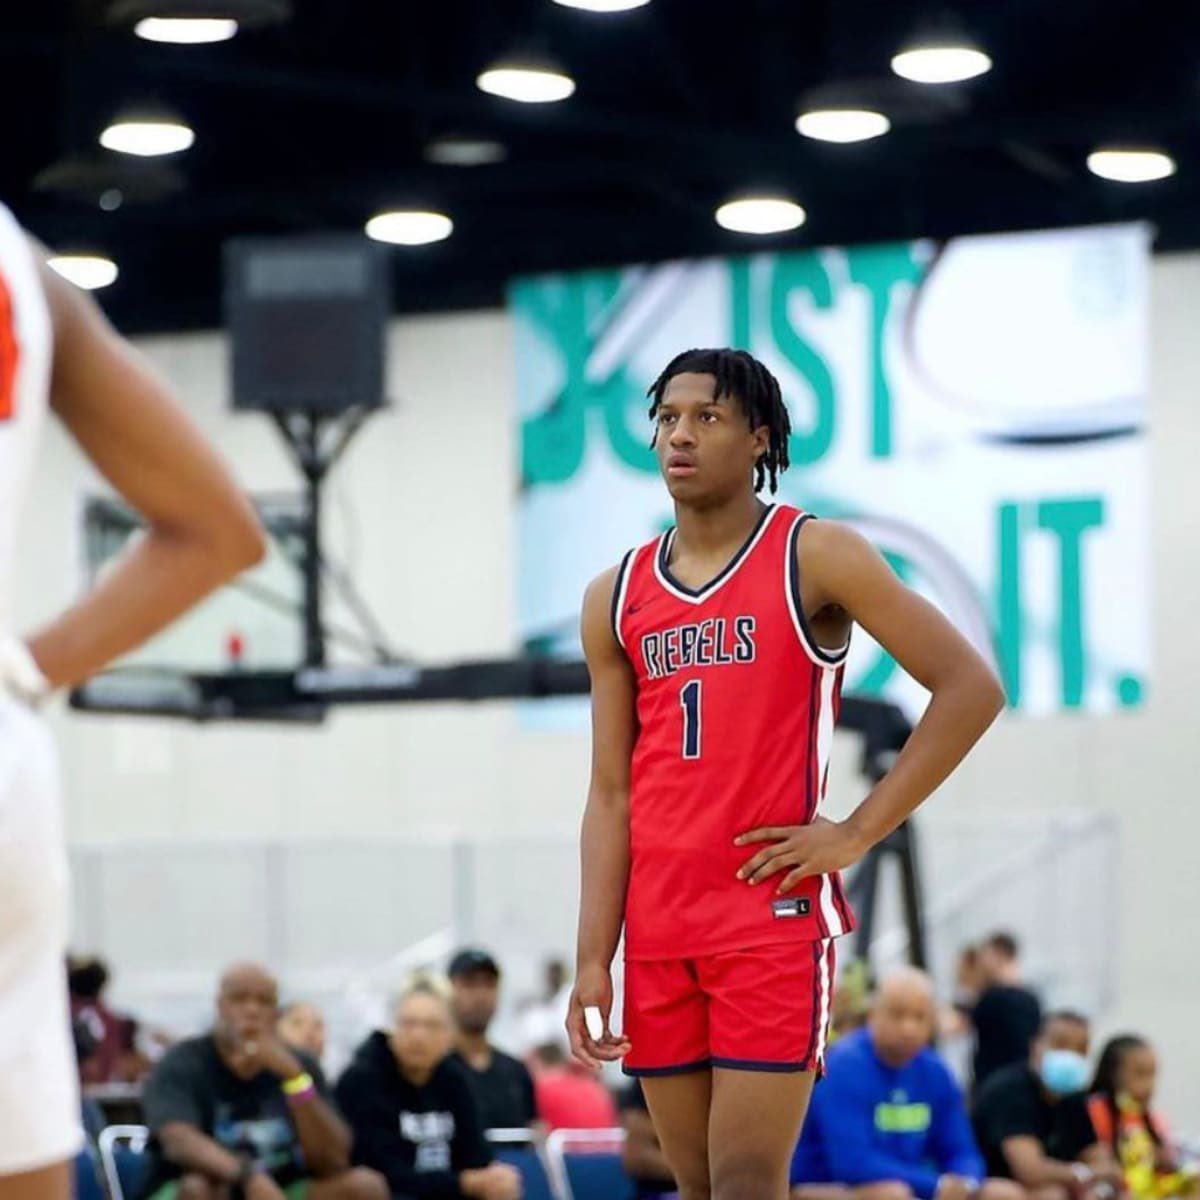 Nike EYBL: Four-star forward Jamier Jones breaks down his final six schools and talks his last visit before his May 12th announcement. Finalist: Houston, LSU, Providence, Ohio State, Kansas and South Carolina Story: 247sports.com/college/basket…